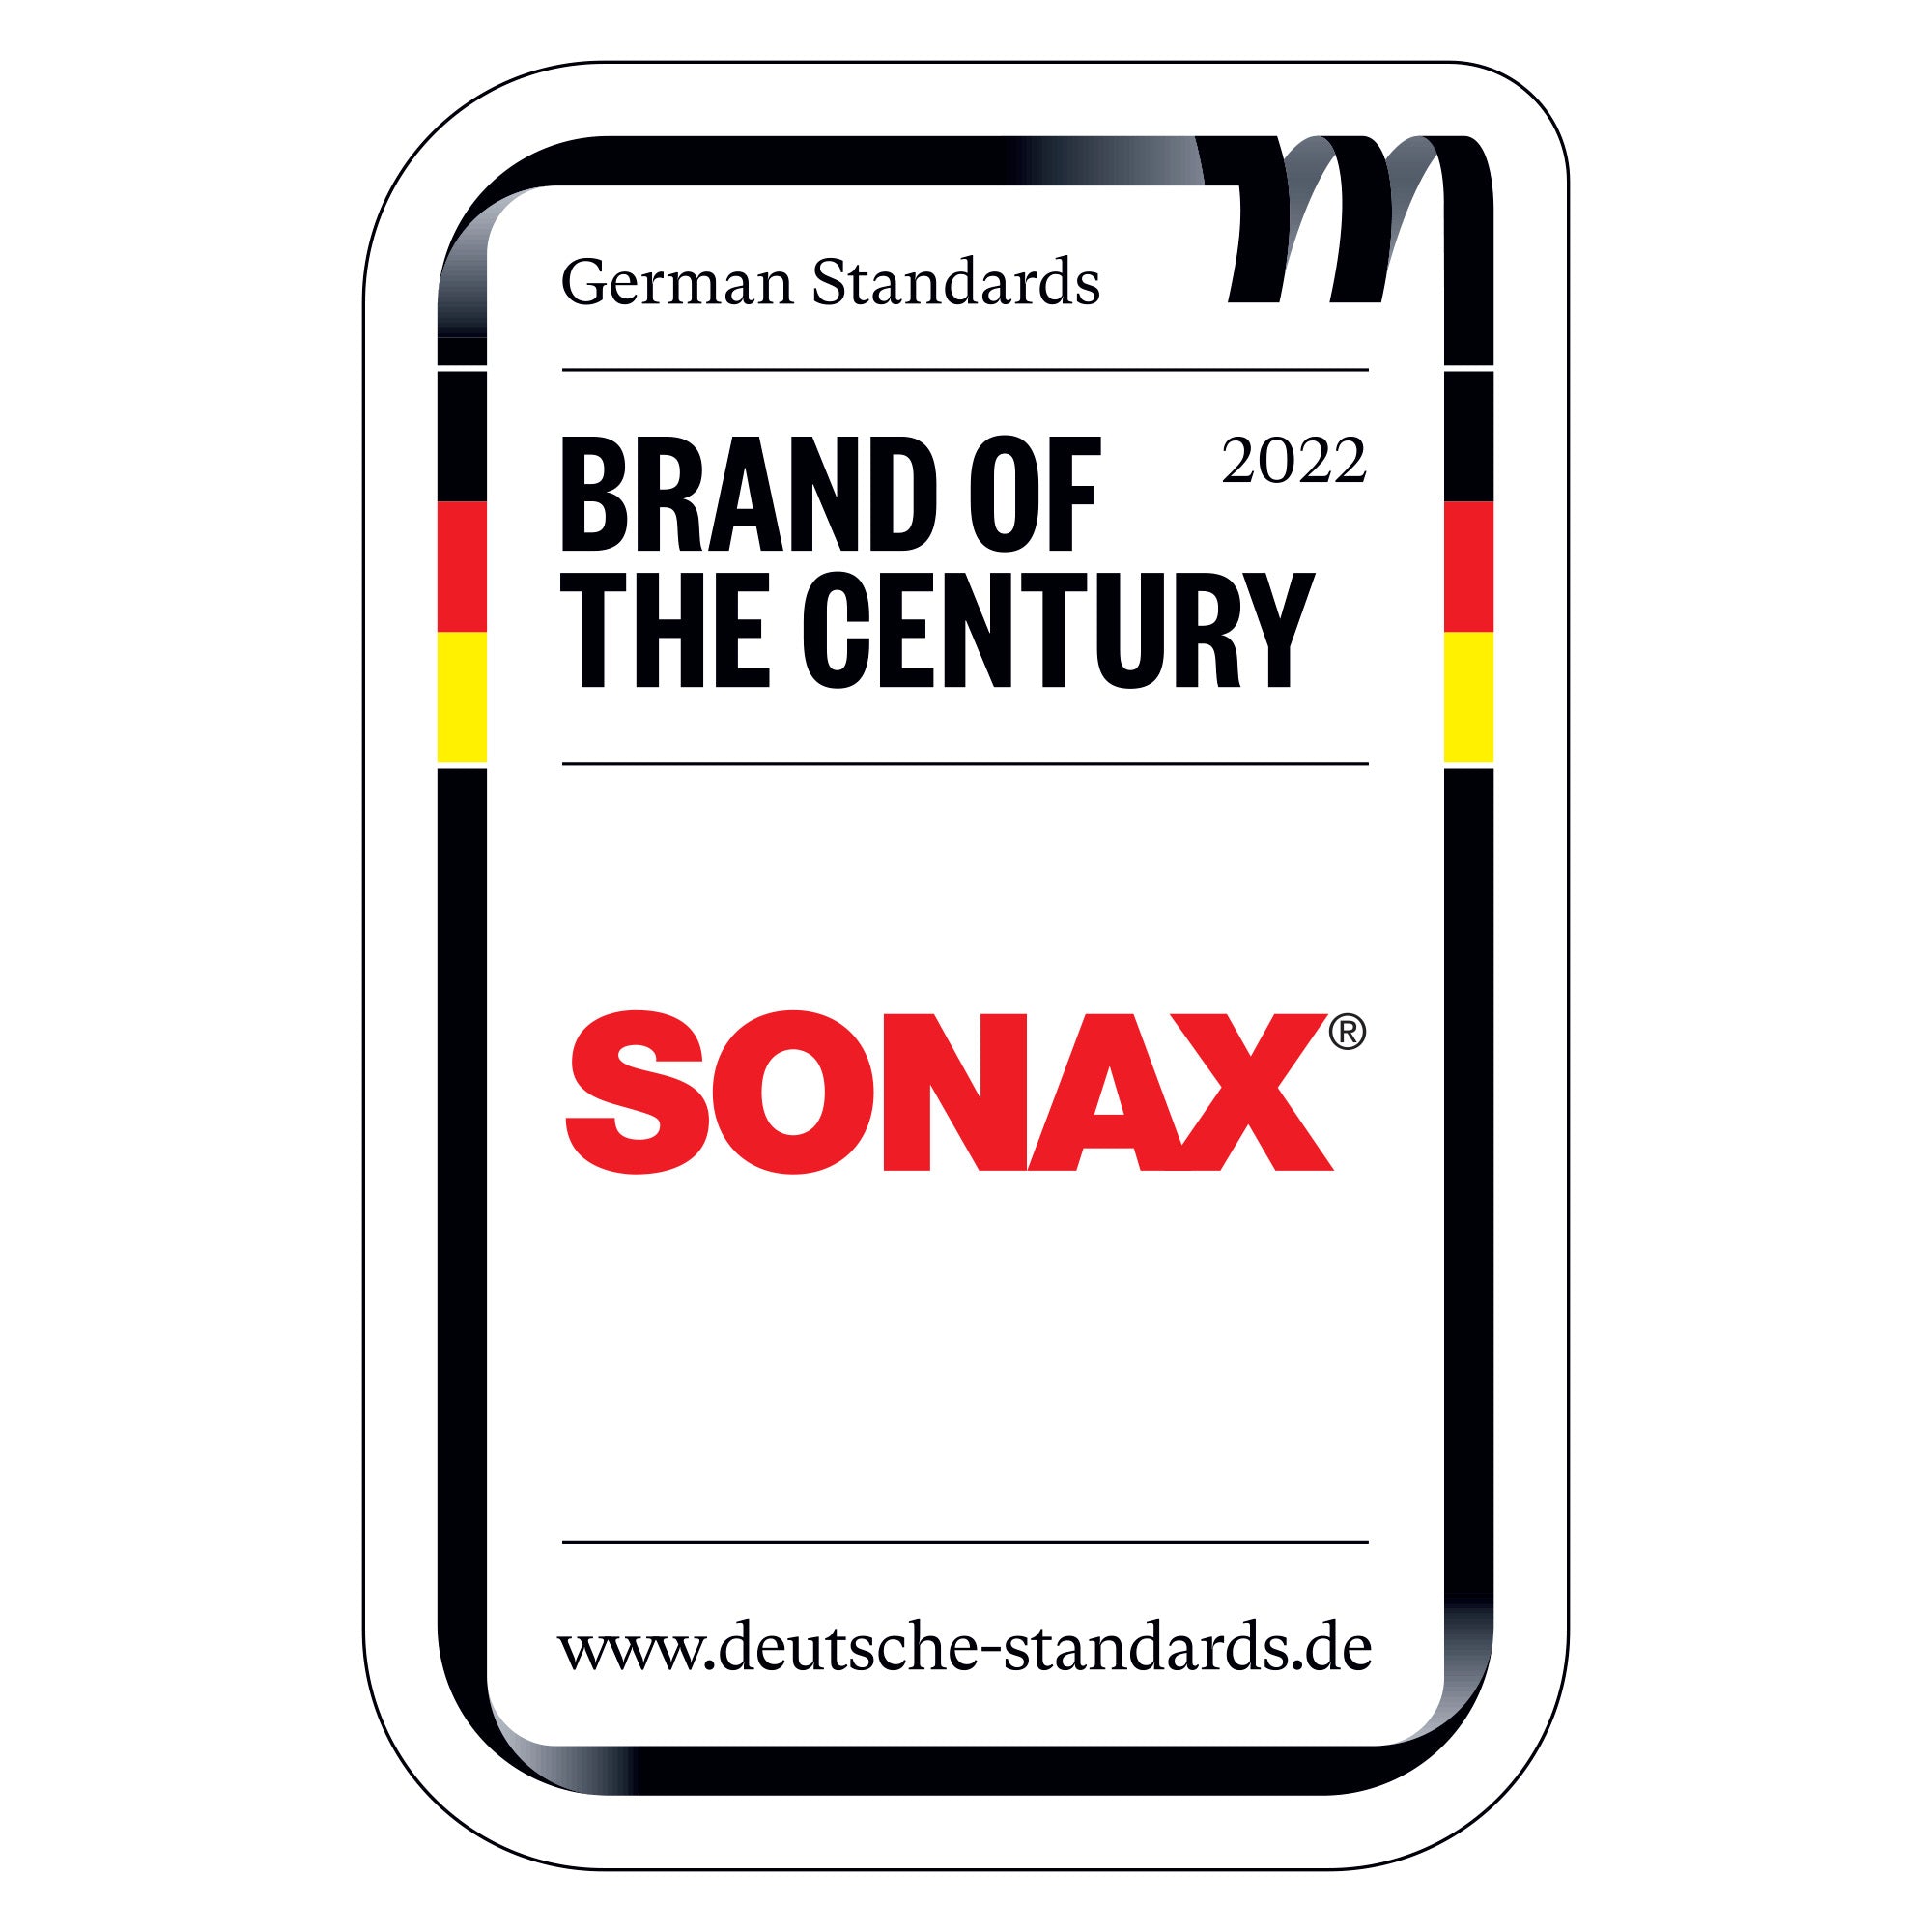 SONAX RECEIVED THE "BRAND OF THE CENTURY" AWARD IN 2022!